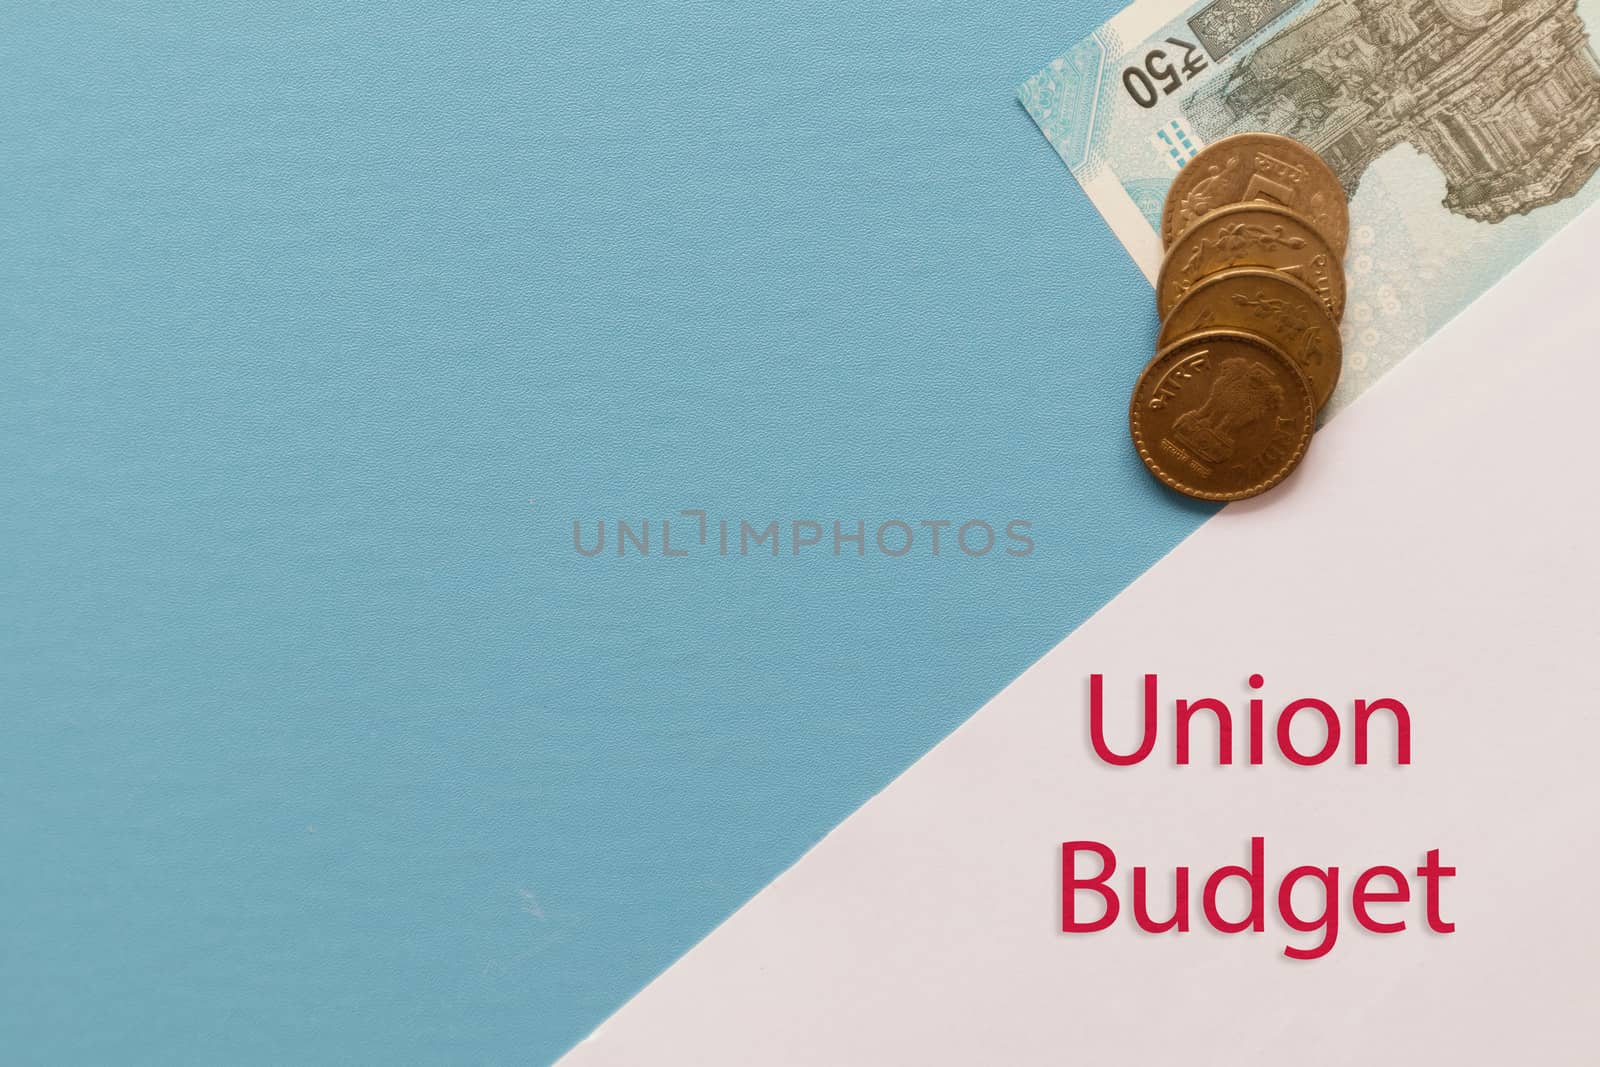 Concept of Indian Union budget with Indian currency notes, coins with copy space on blue background